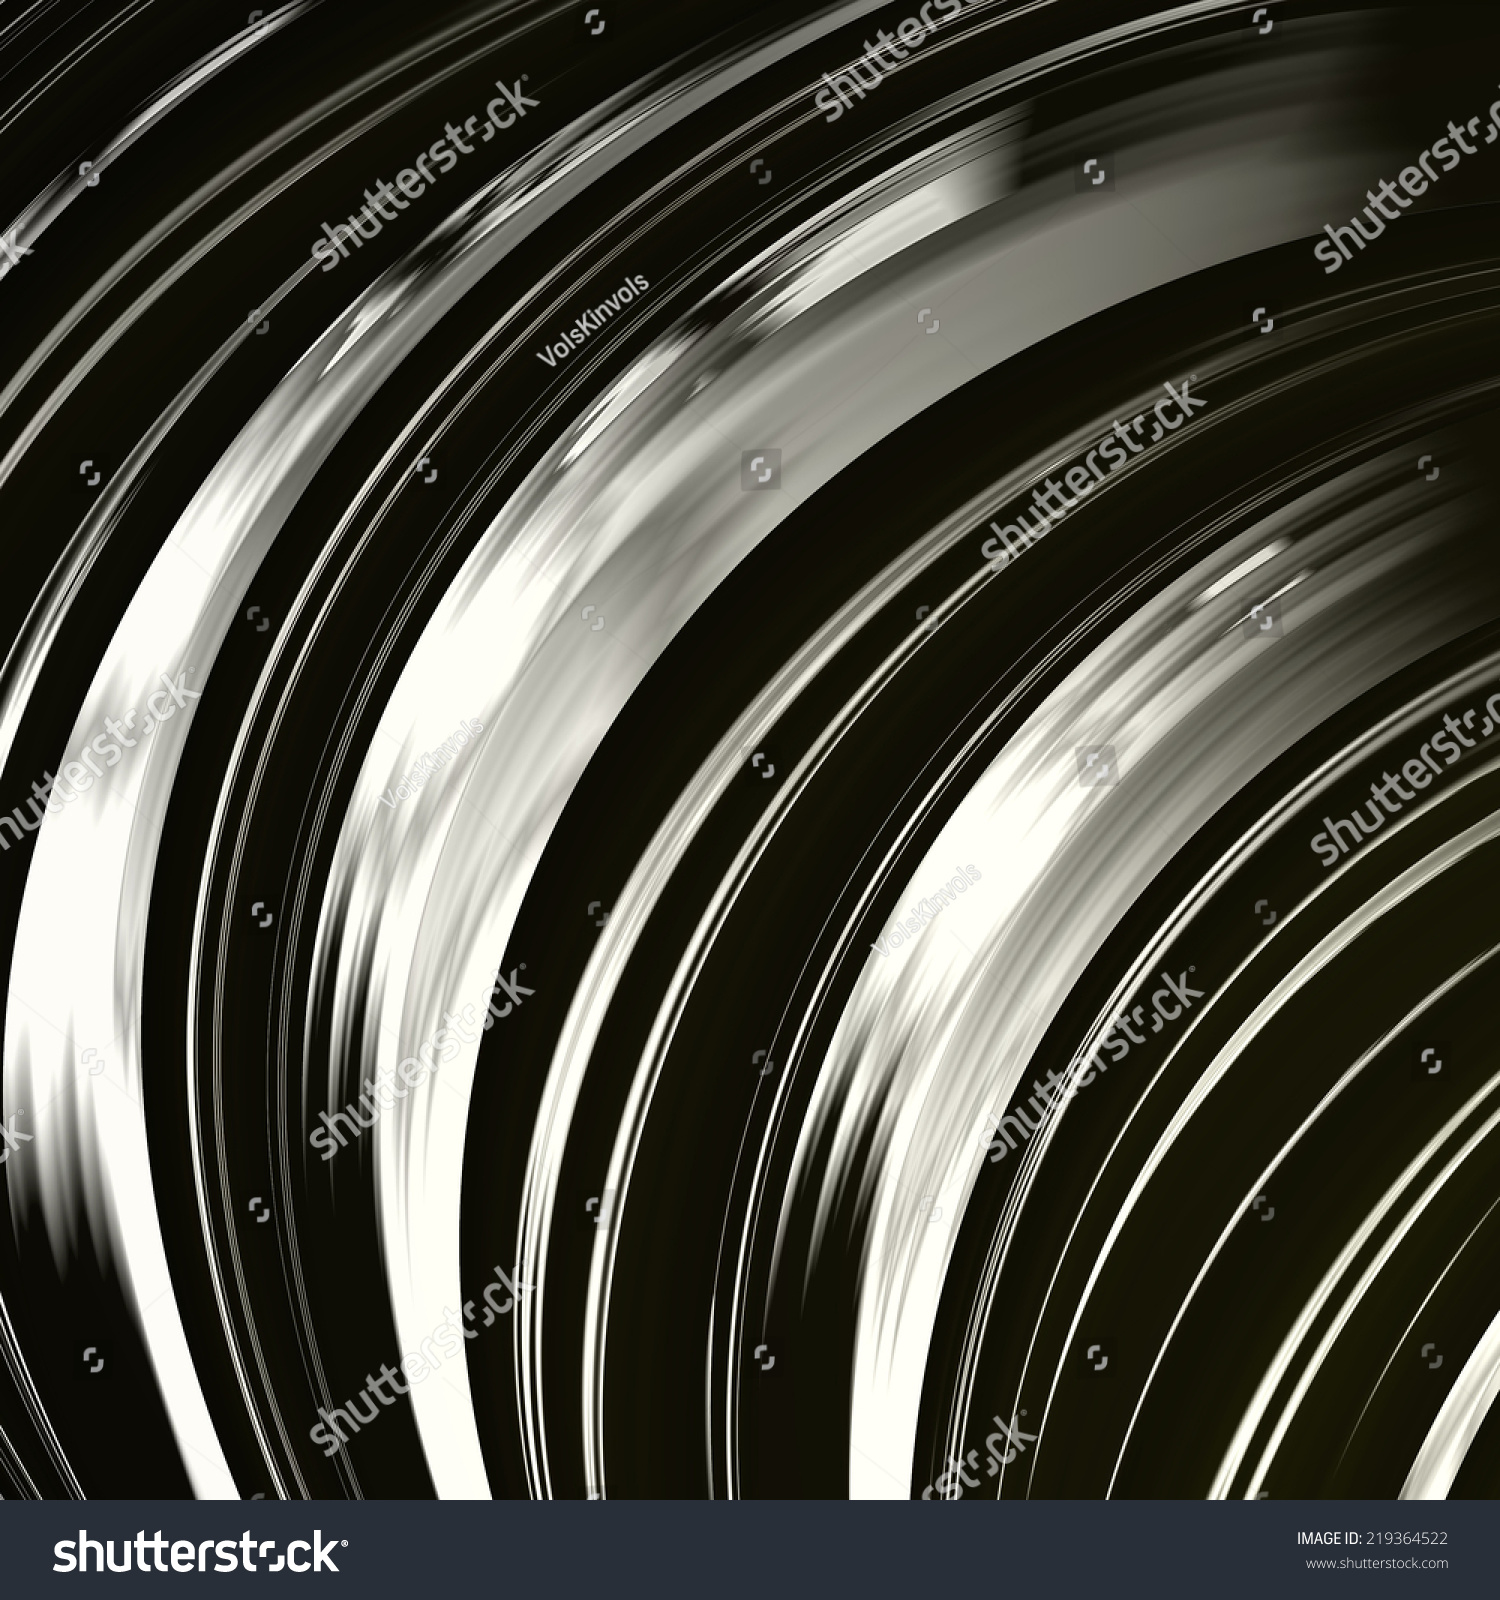 Grayscale Abstract Background Stock Photo 219364522 ...